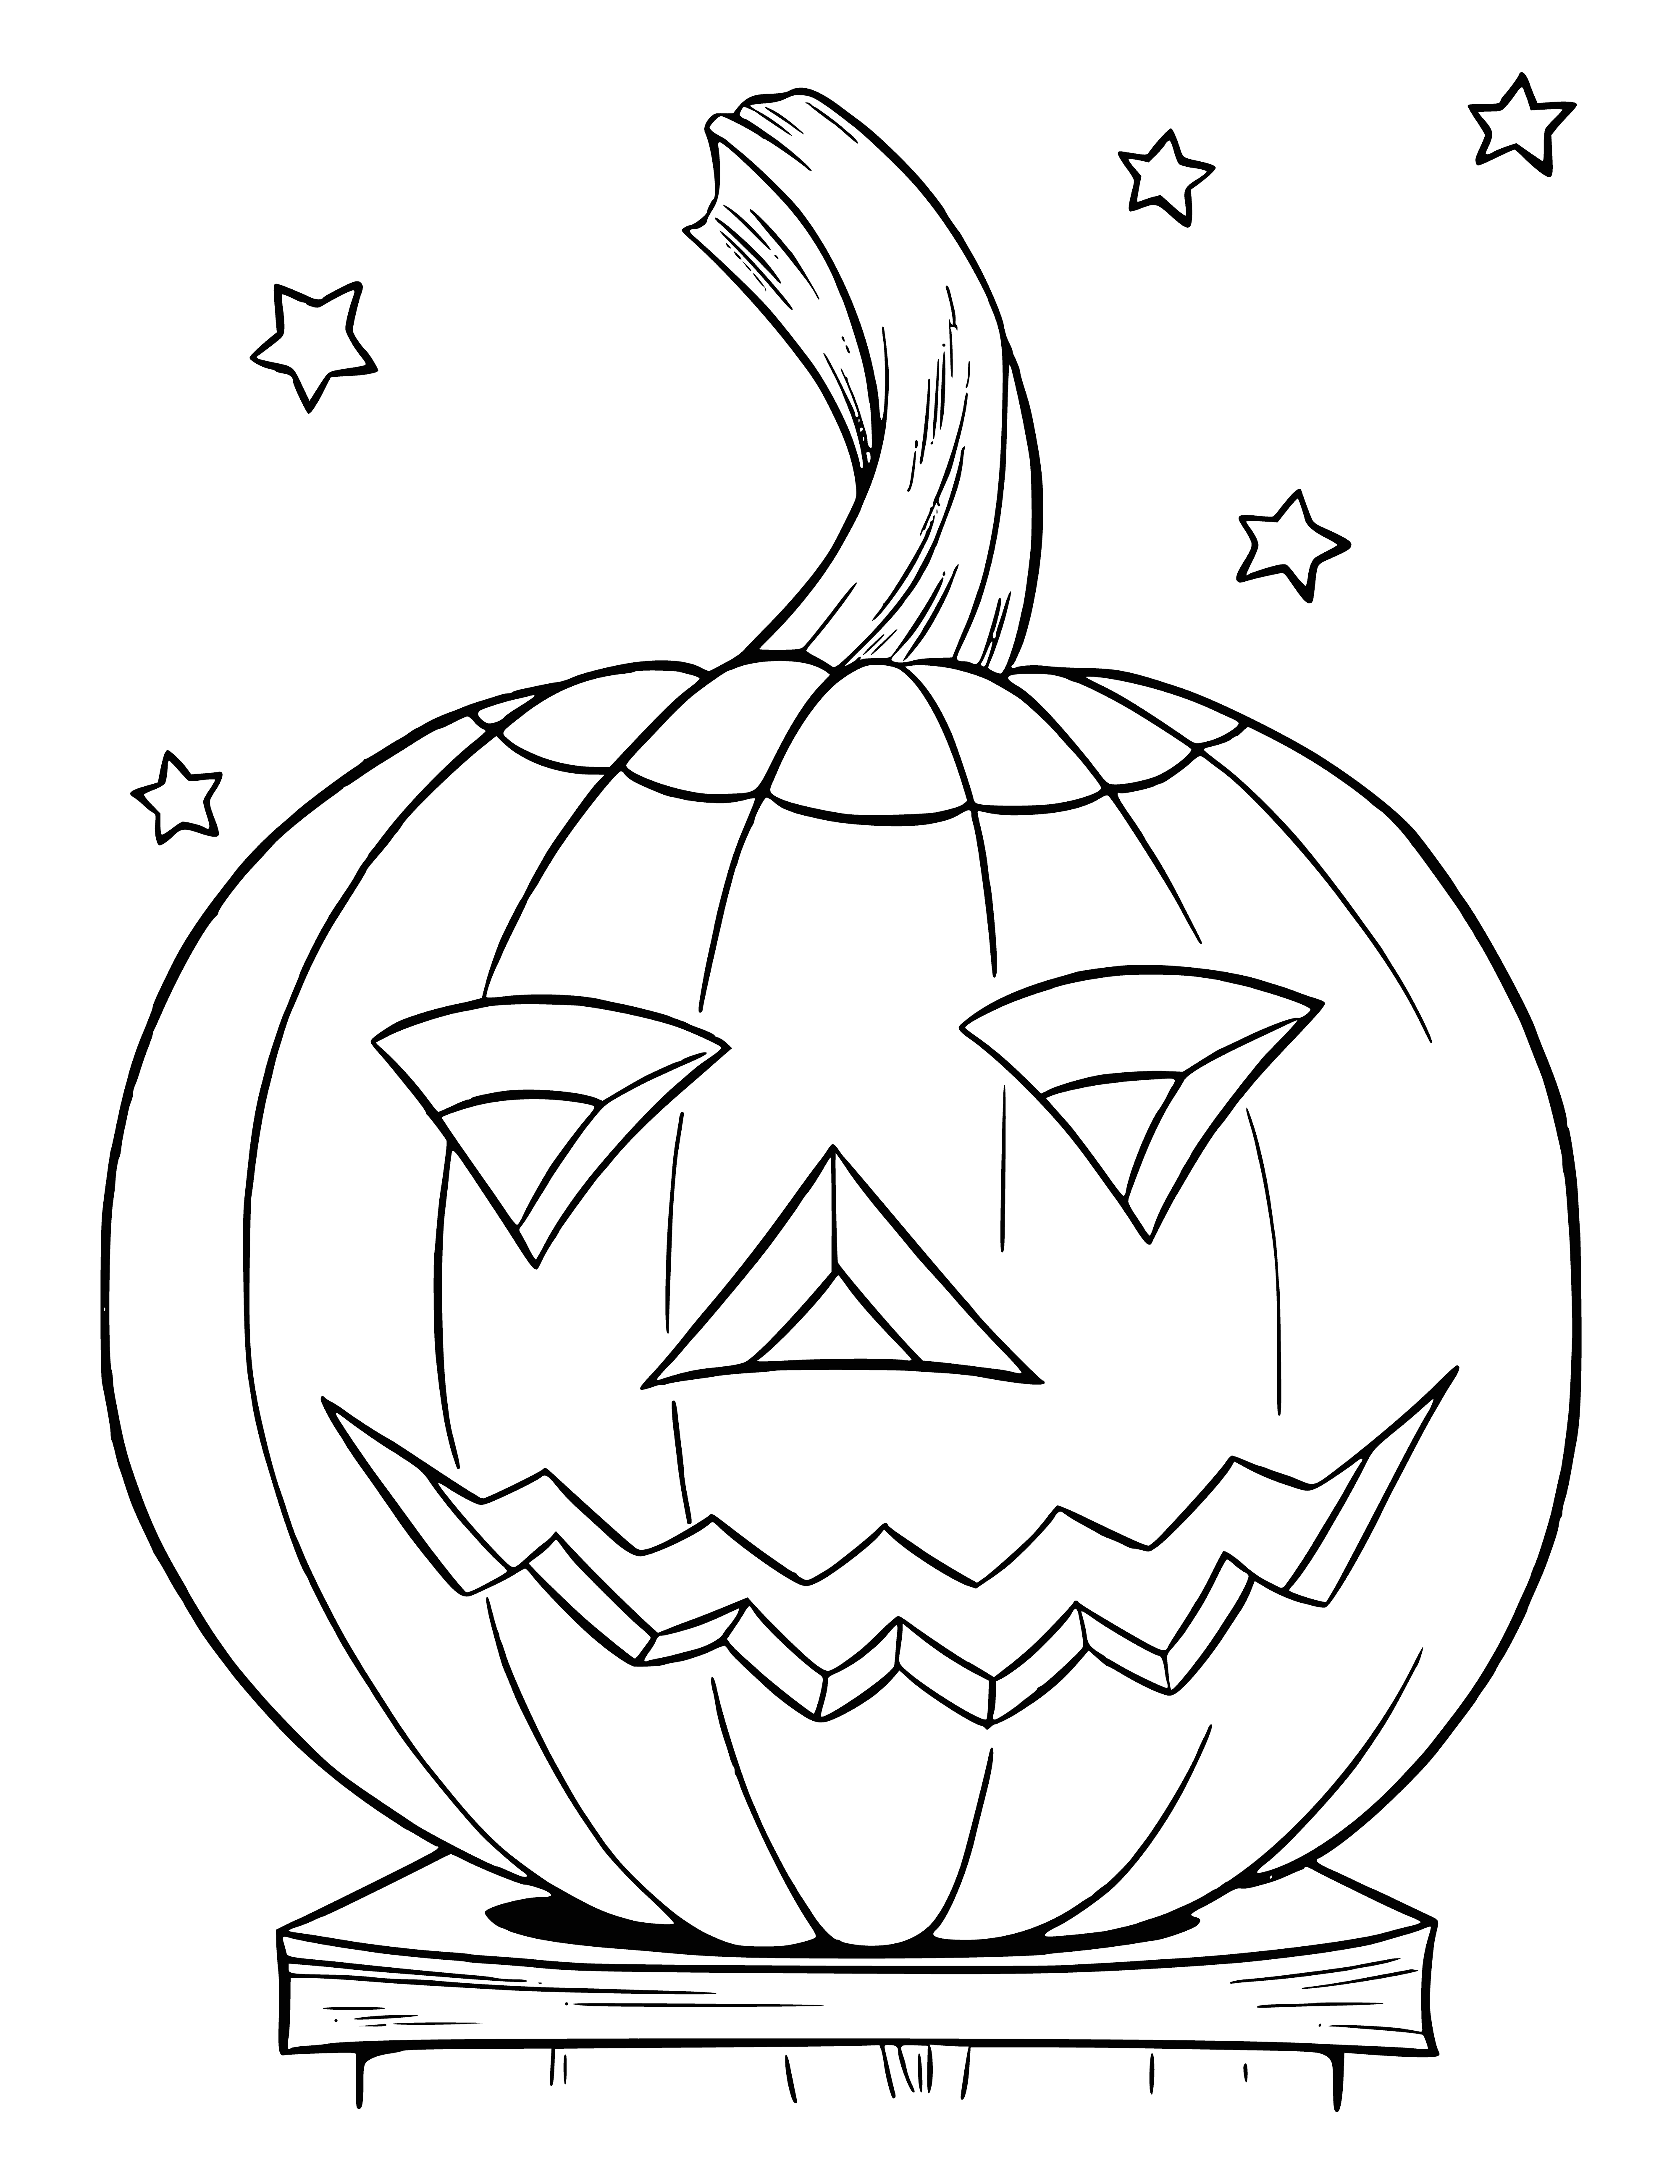 coloring page: Big orange pumpkin with toothy grin and white triangle eyes, topped with a green stem. #Halloween #Decoration